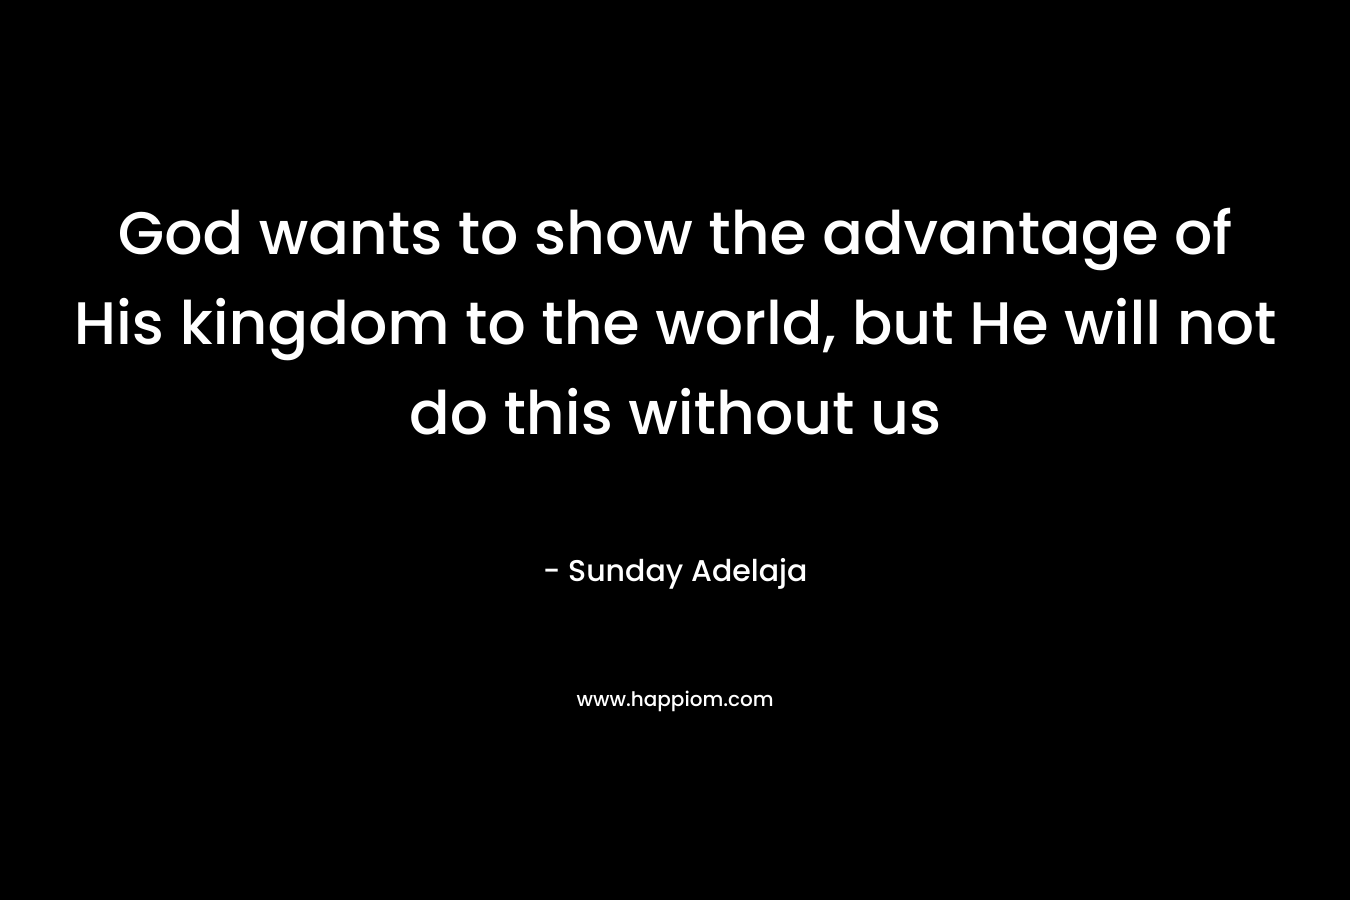 God wants to show the advantage of His kingdom to the world, but He will not do this without us